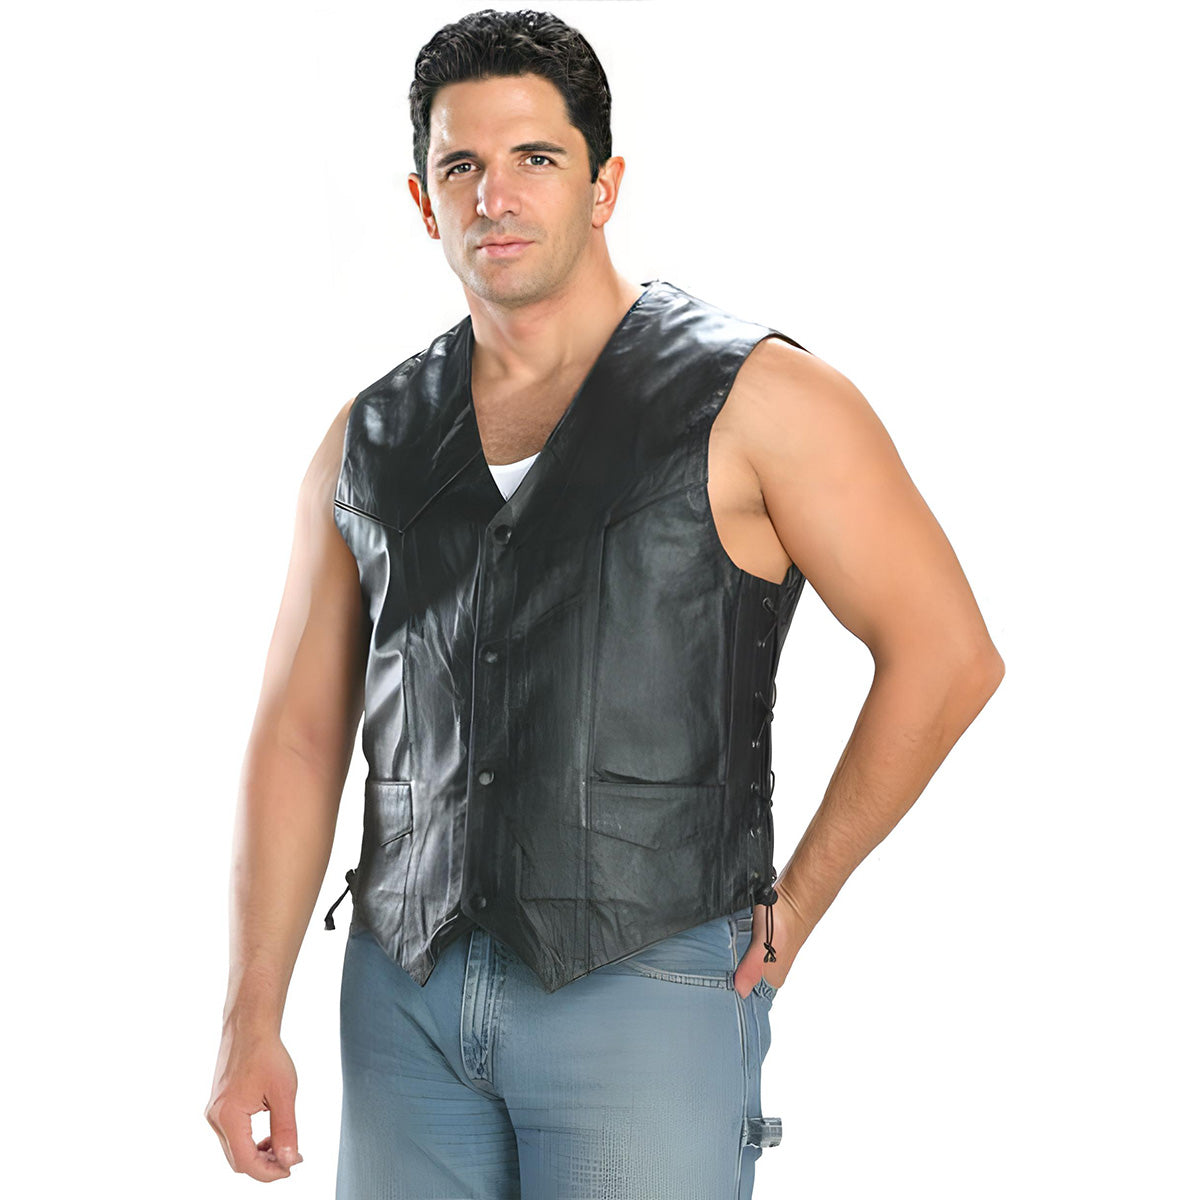 Event Leather ELM3920 Black Motorcycle Leather Vest for Men w/ 23 Patches -  Riding Club Adult Motorcycle Vests